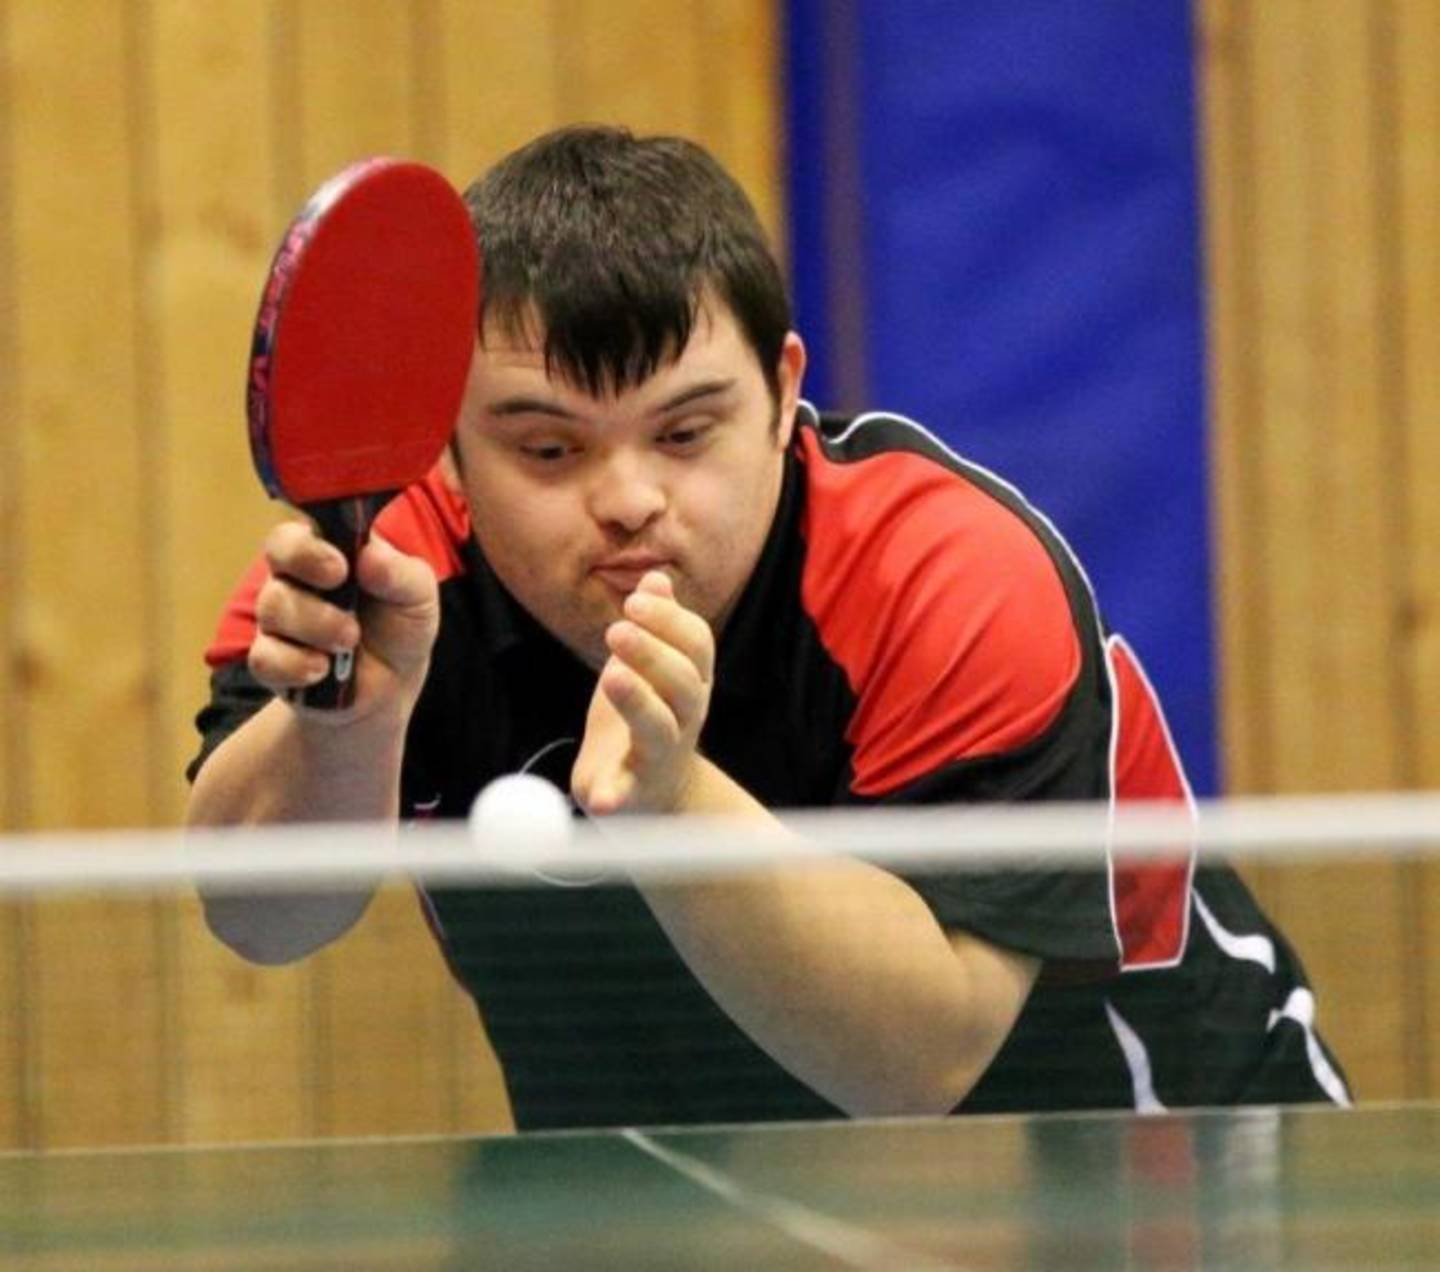 Harry Fairchild, the world’s first qualified table tennis coach with Down’s syndrome